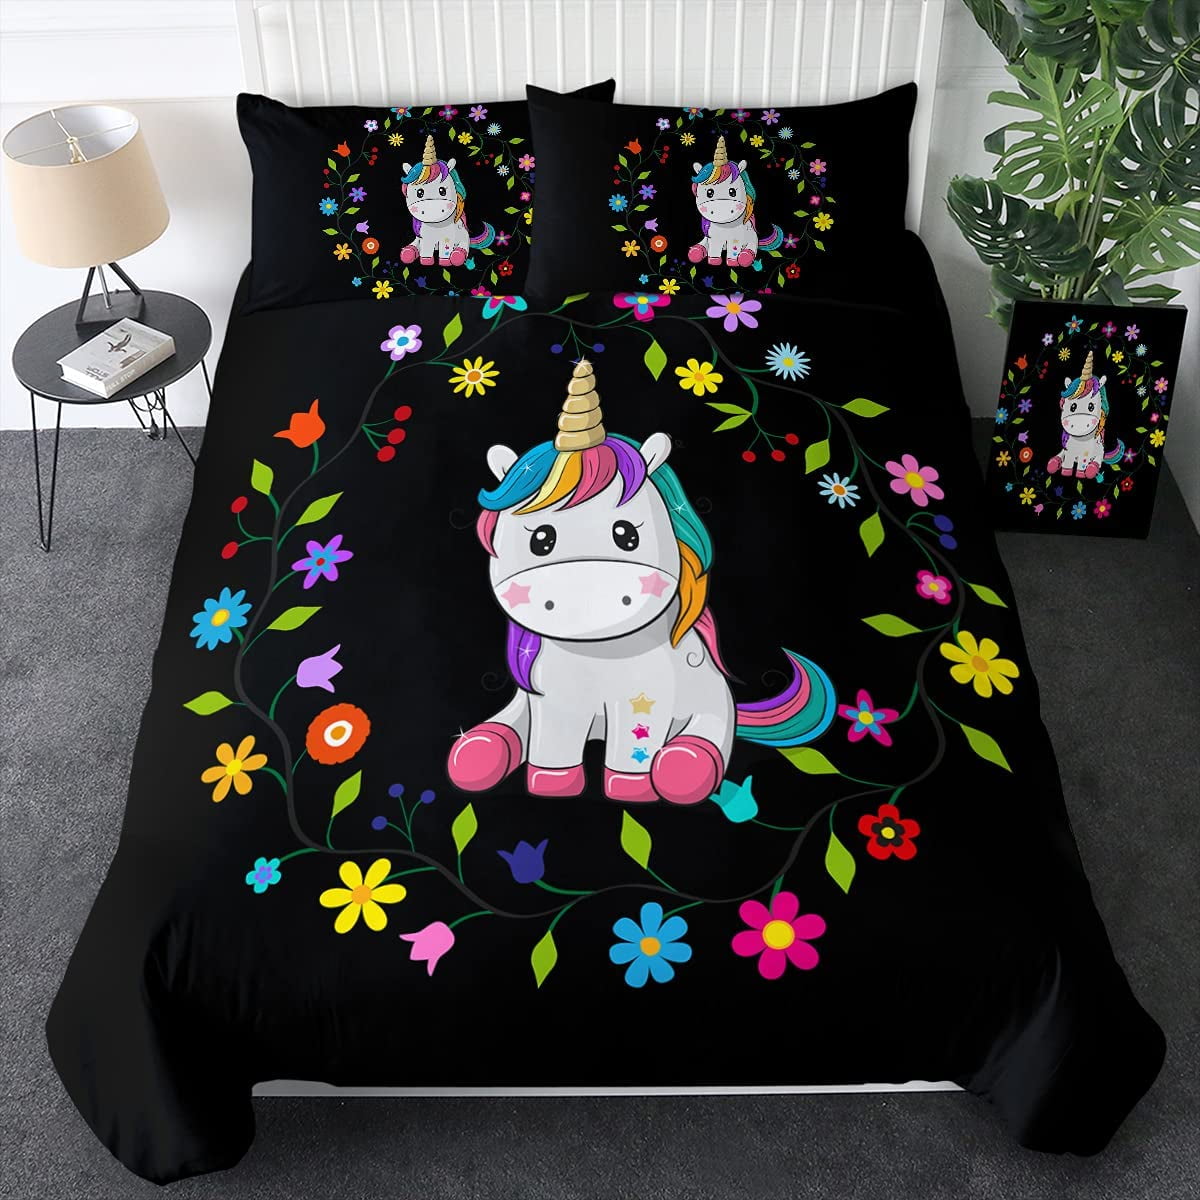 KFZ Unicorn Queen Duvet Cover Queen 3 Piece Kids Bed Sheets with 90x90 Unicorn Duvet Cover Bedding Comforters & Sets for Kids Bed Frame No Comforter 2 Pillow Covers 